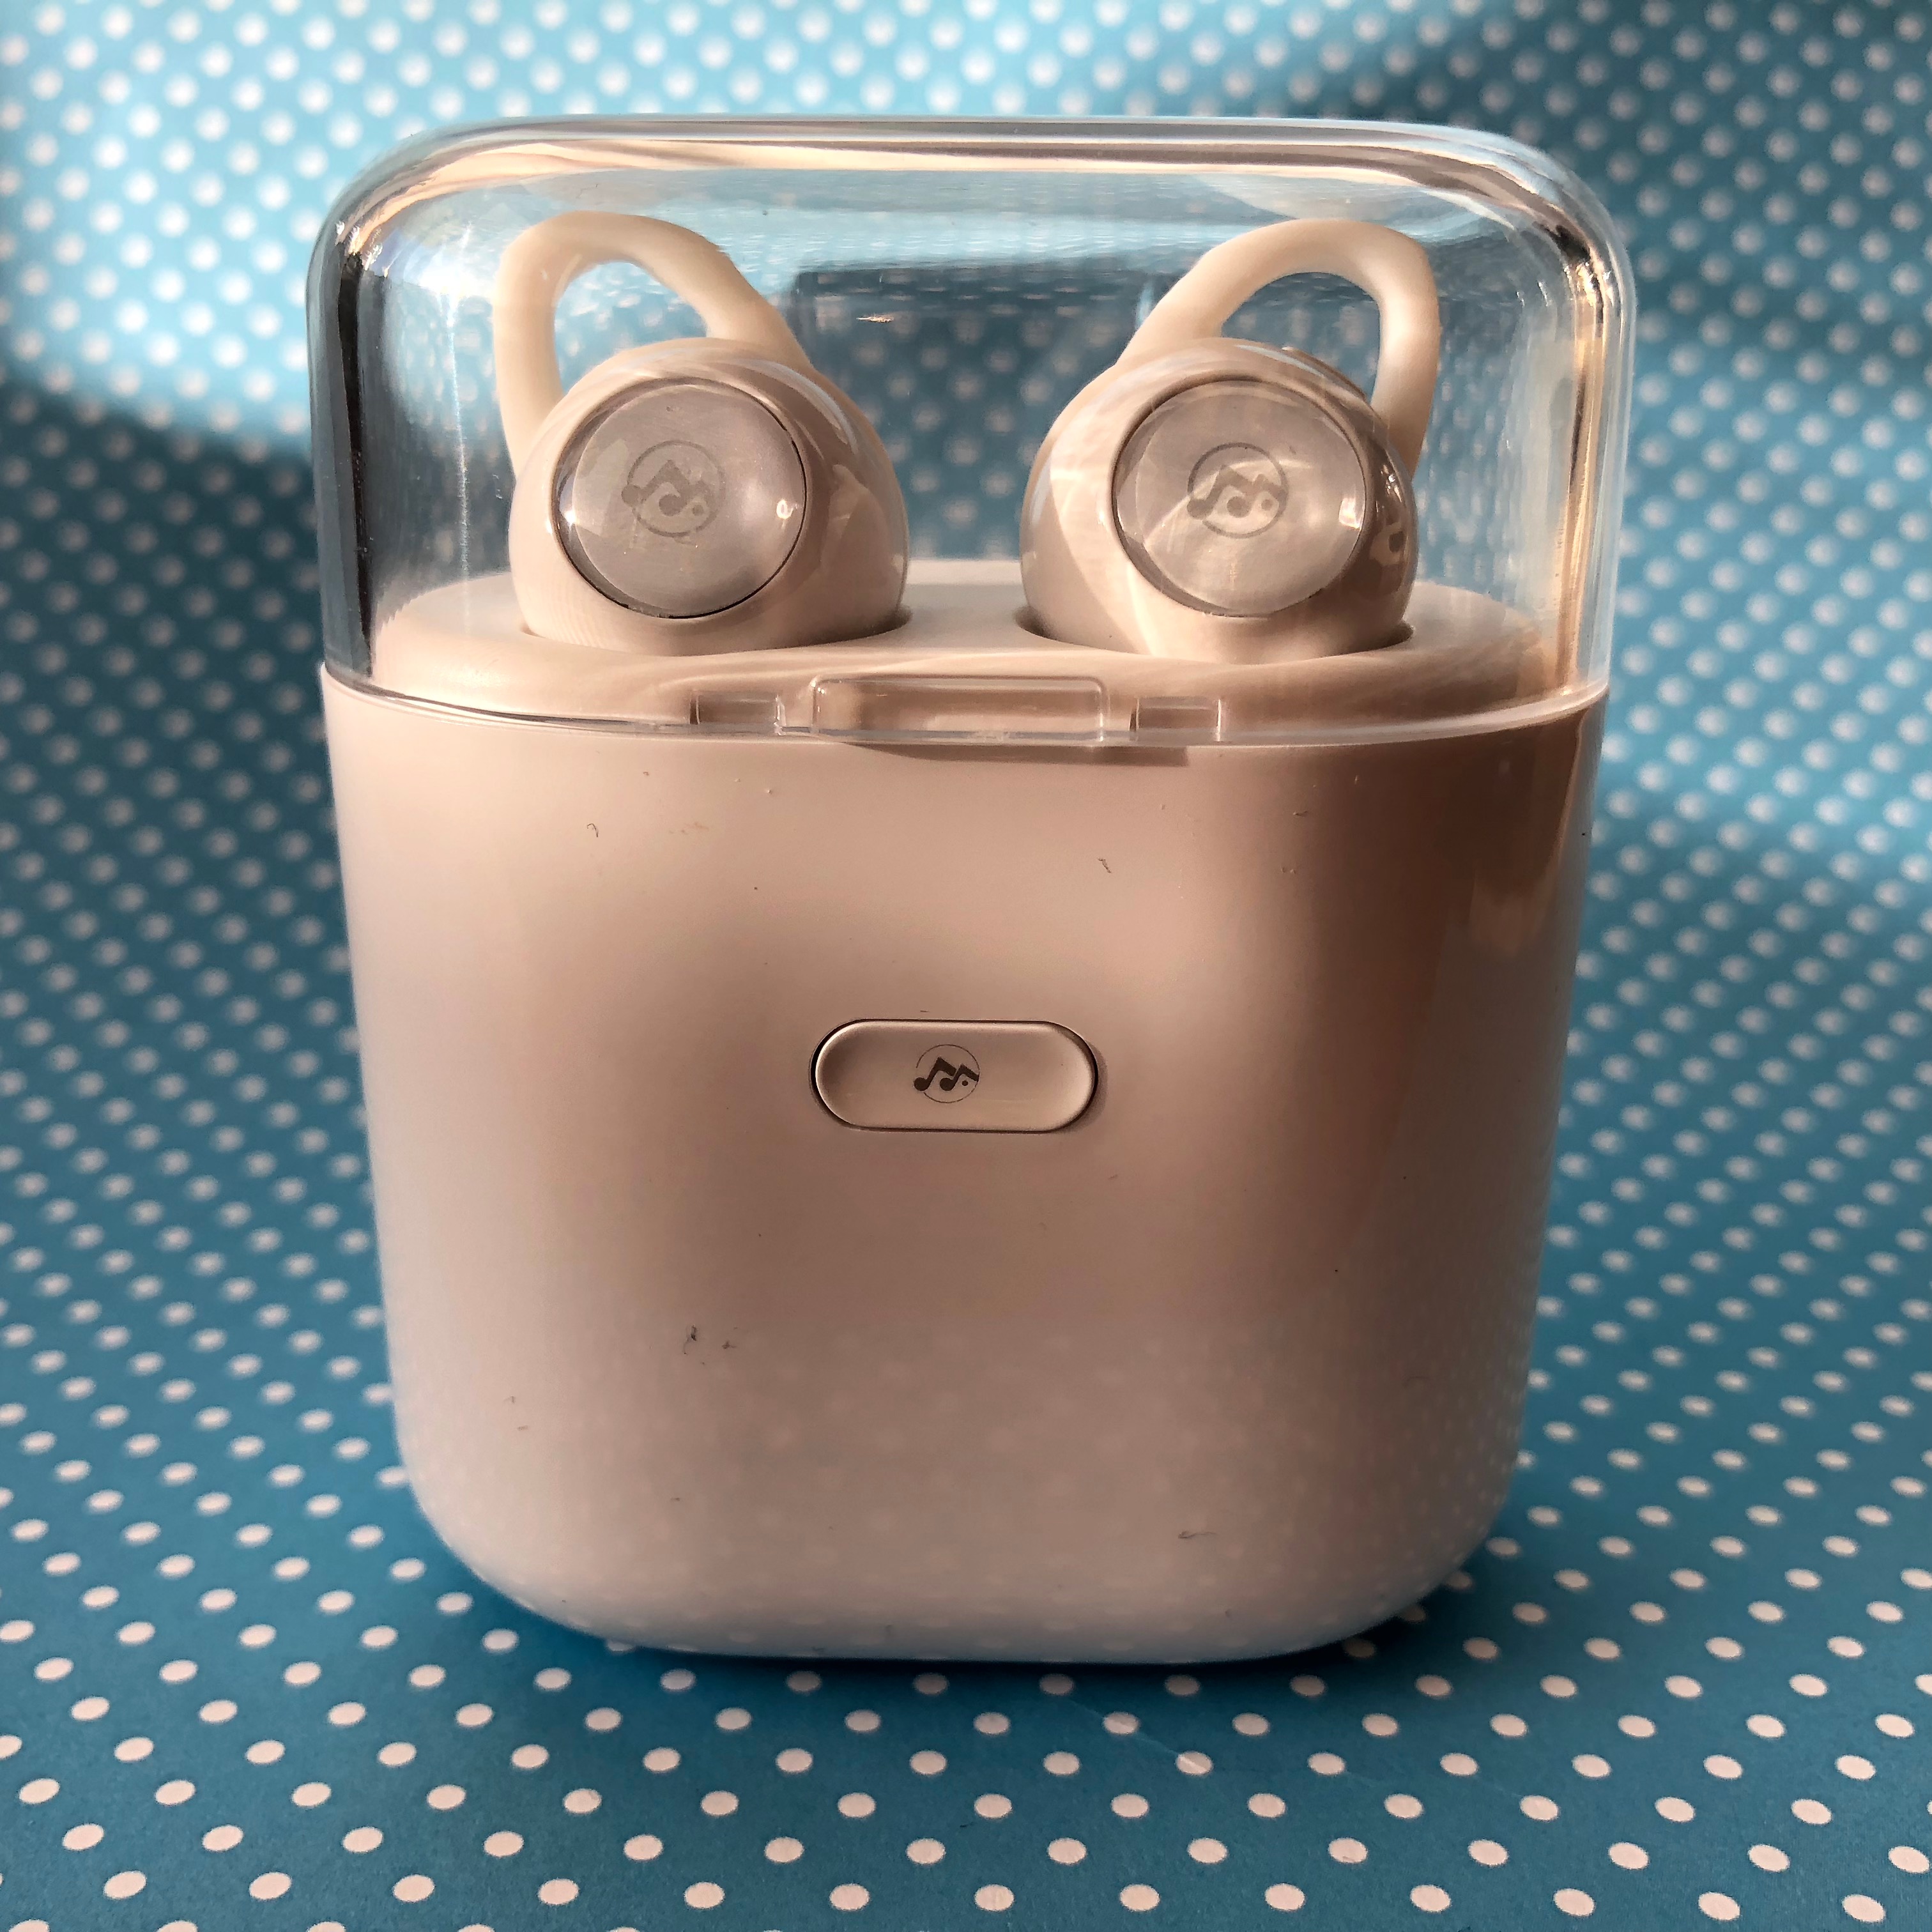 Rockpods truly wireless earbuds headphones review